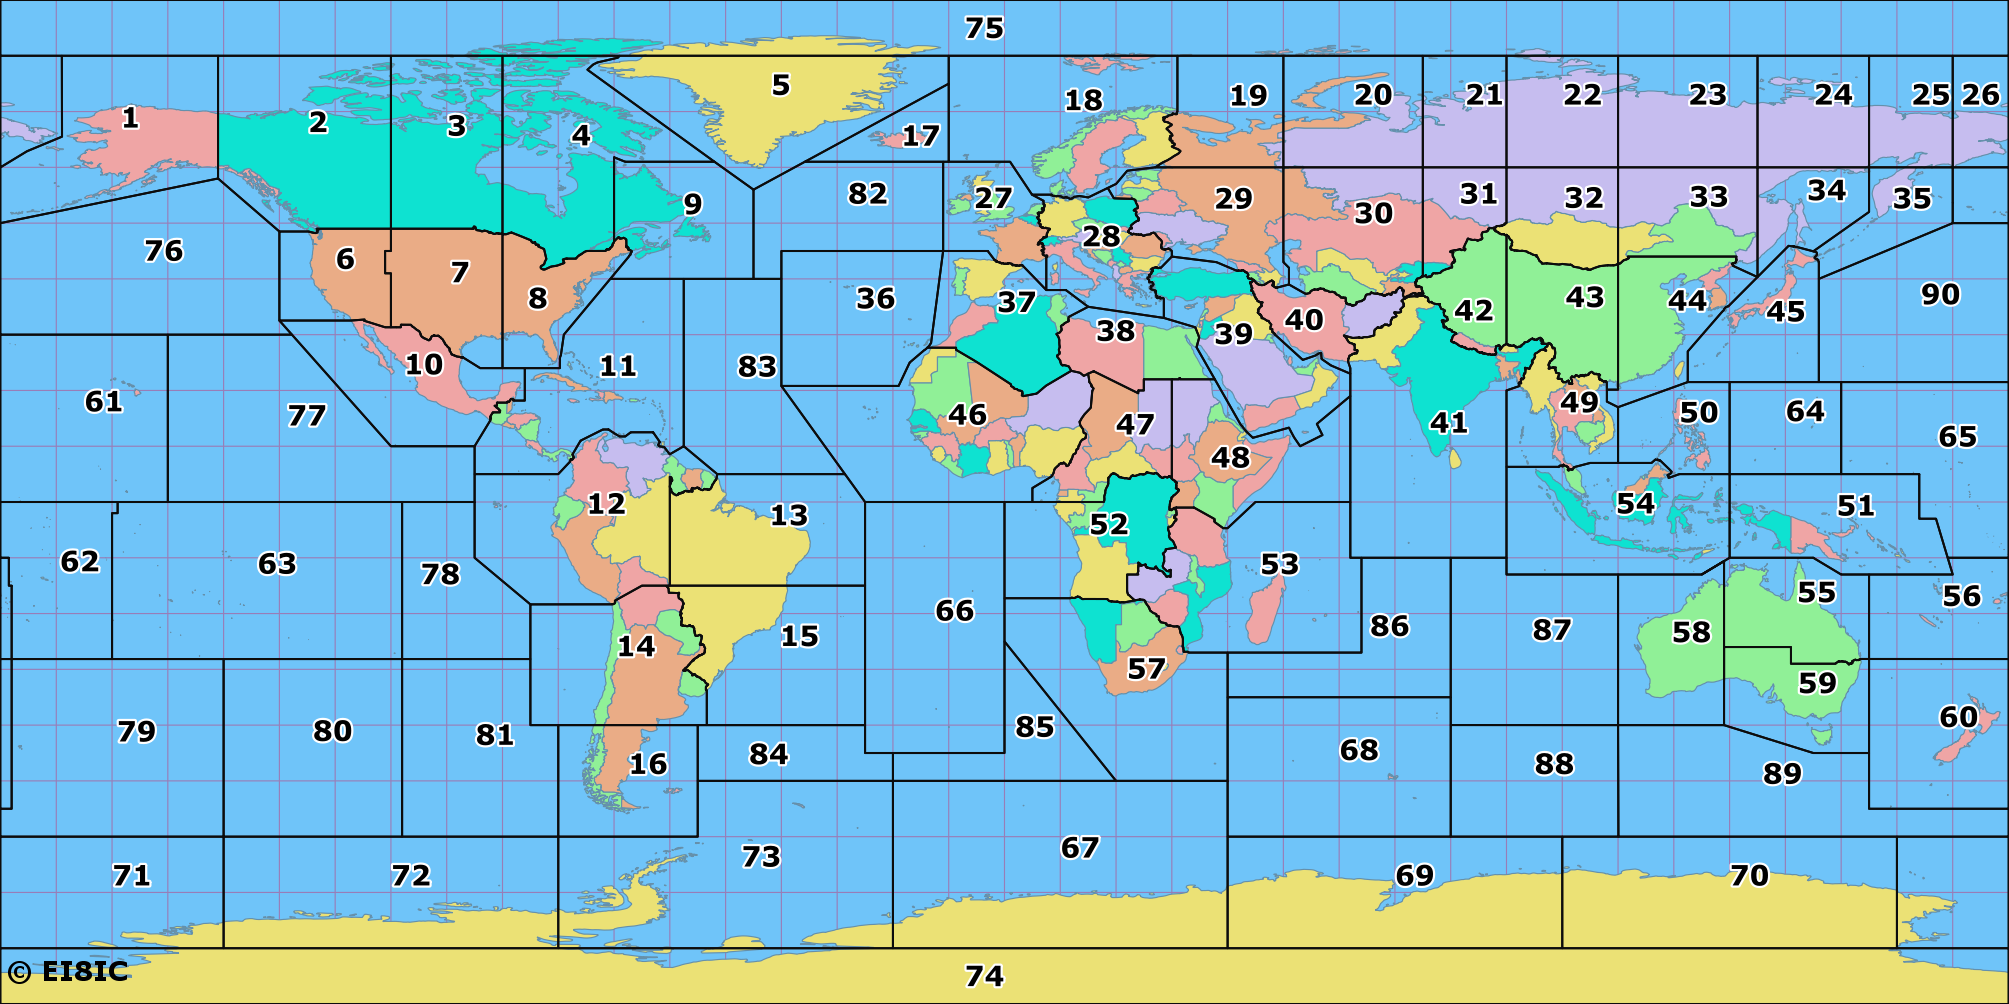 ITU zones map from https://www.mapability.com/ei8ic/maps/ituzone.php